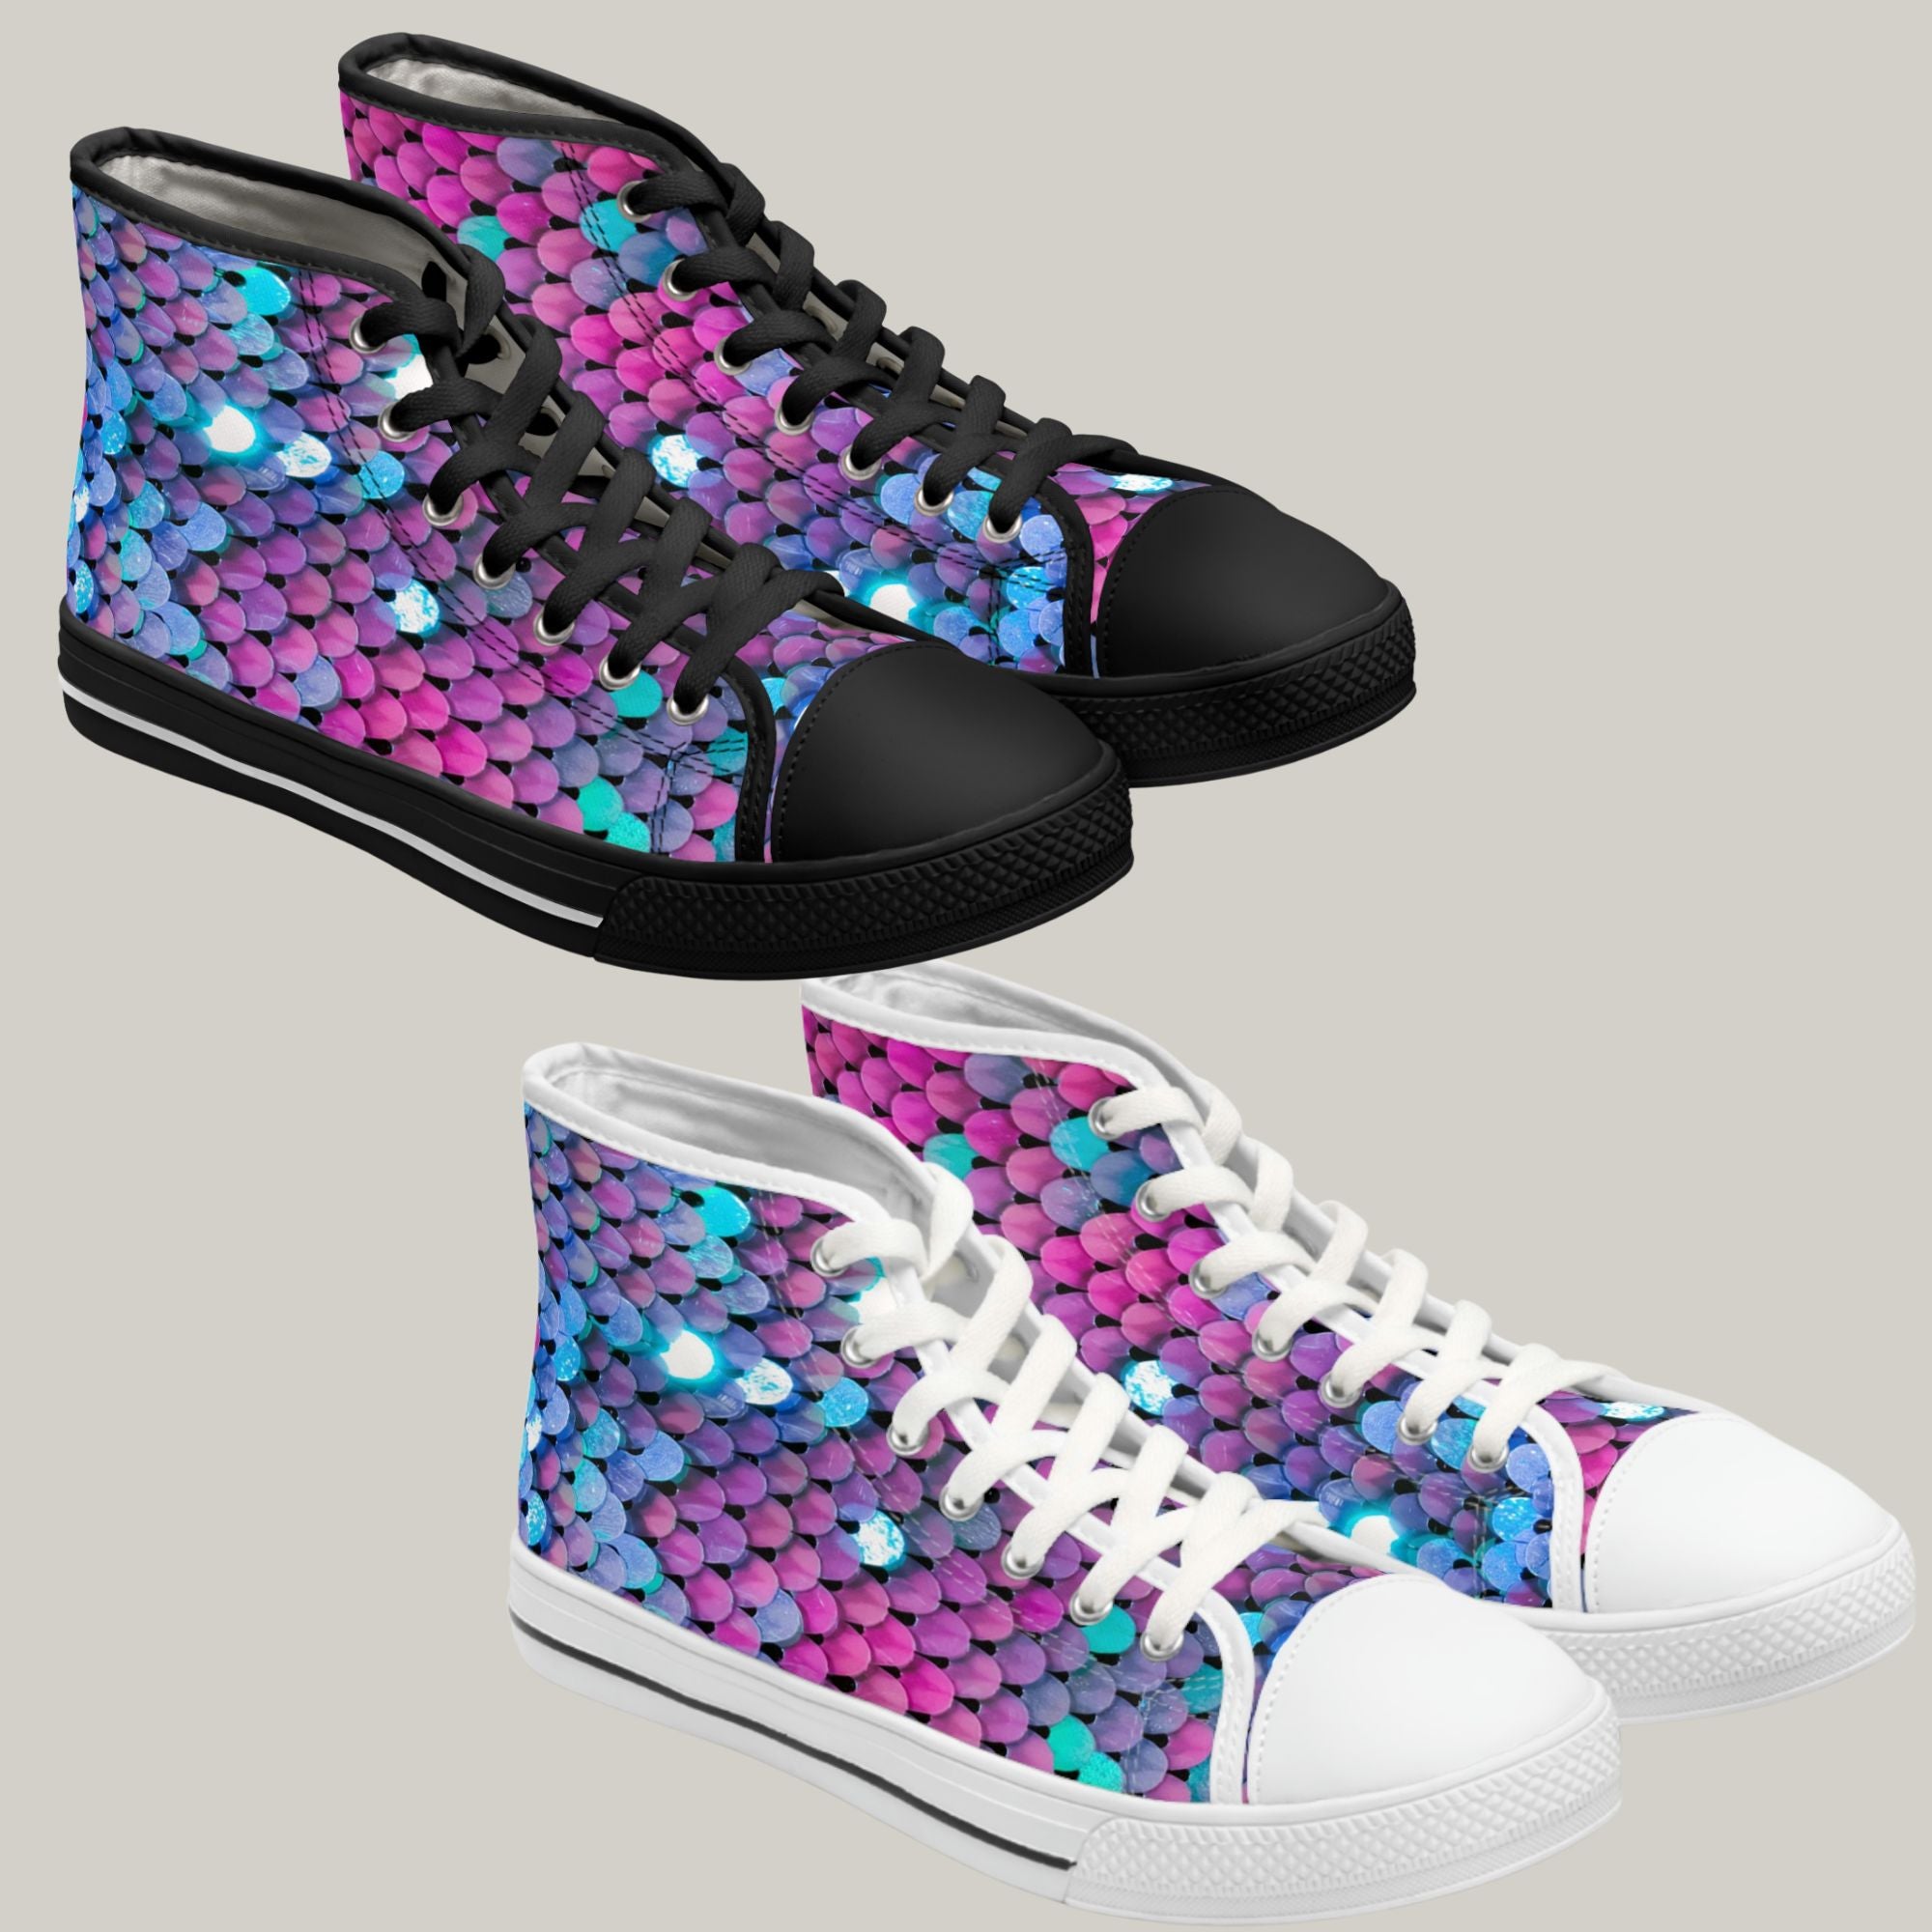 HOT PINK & BLUE SEQUIN PRINT - Women's High Top Sneakers Black and White Sole